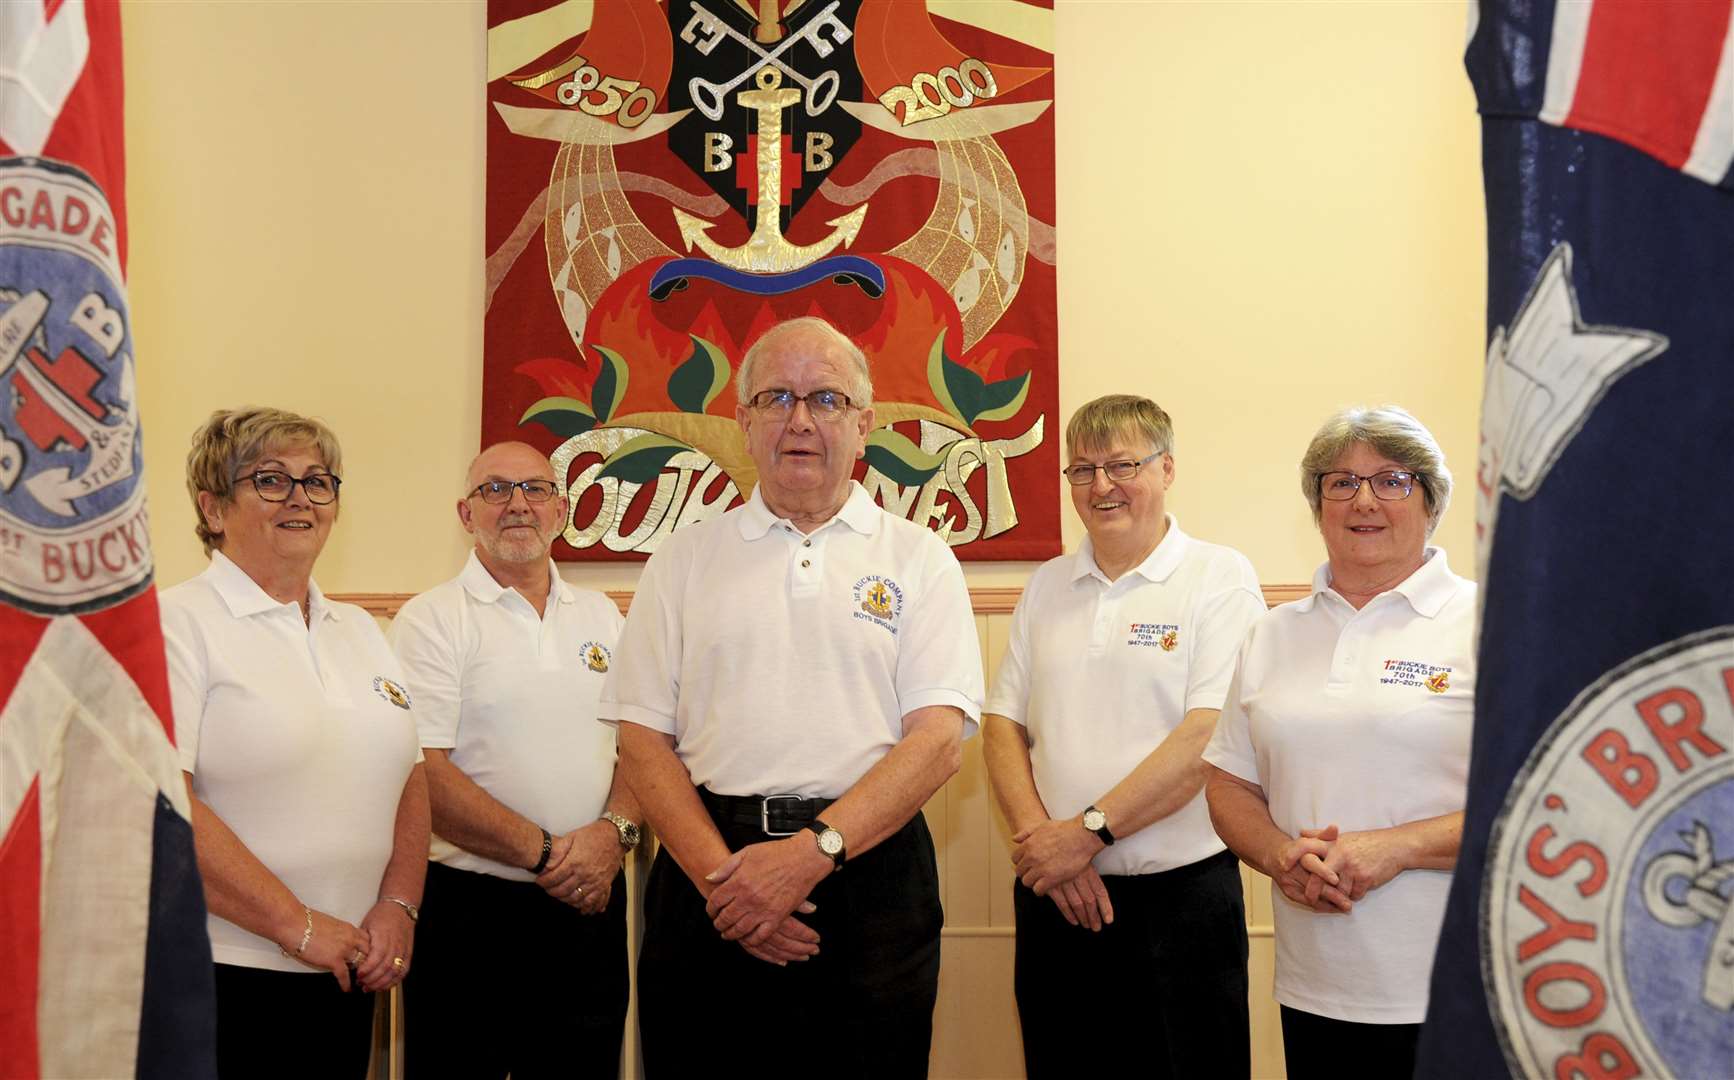 Celebrating 265 years of service to Buckie Boys' Brigade are (from left) Catherine Stewart, Grant Stewart, Gordon Pirie, Captain Alan McIntosh and Jenny McIntosh. Picture: Eric Cormack